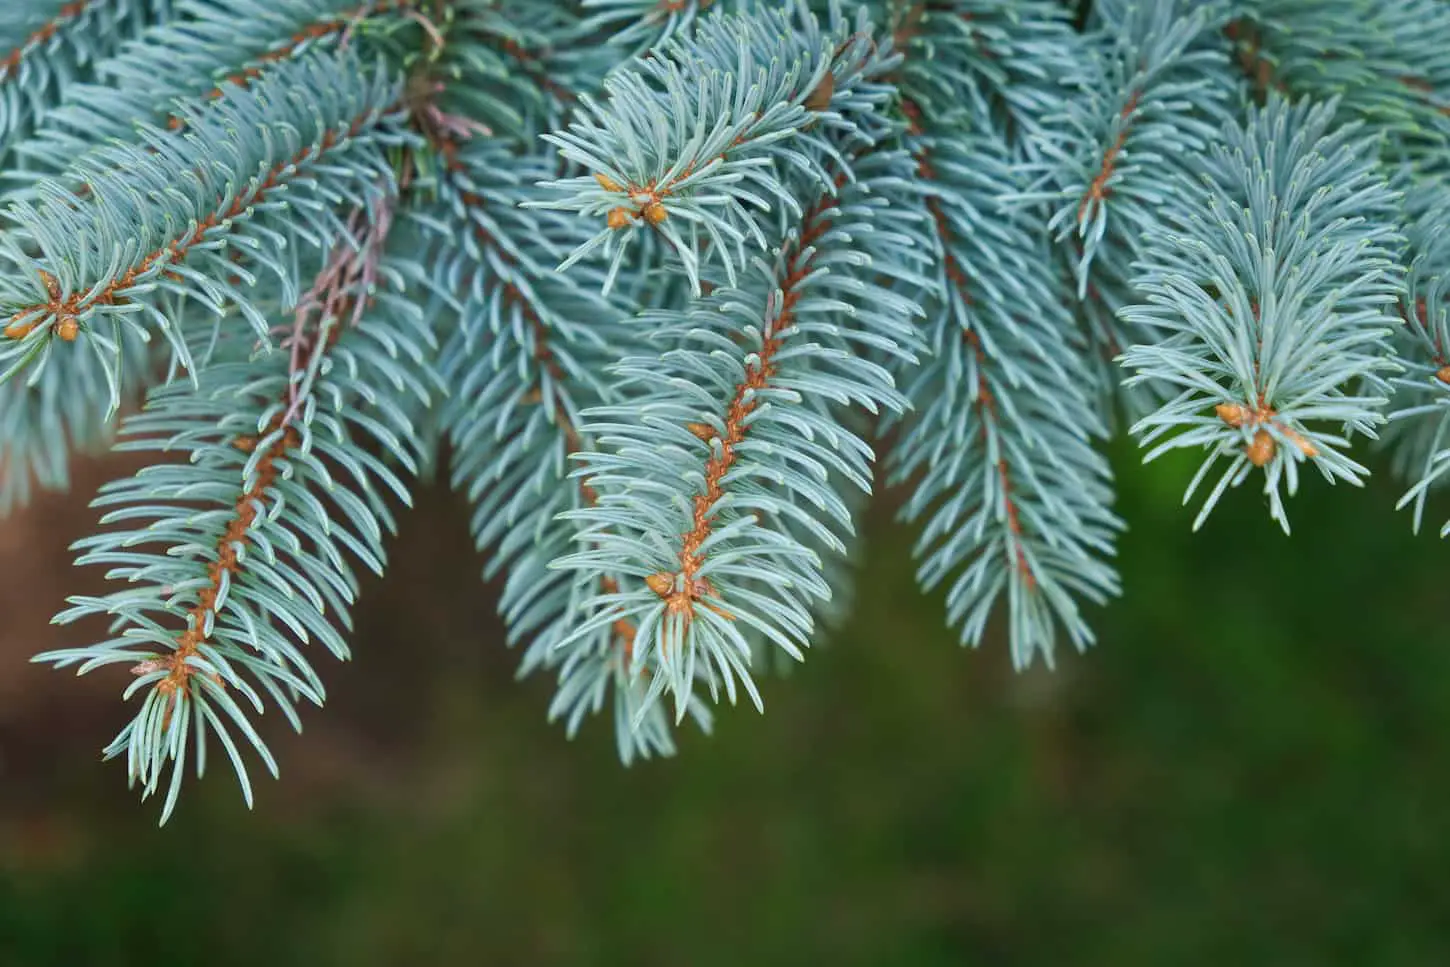 An image of a Closeup of blue spruce tree branches with blurred background.